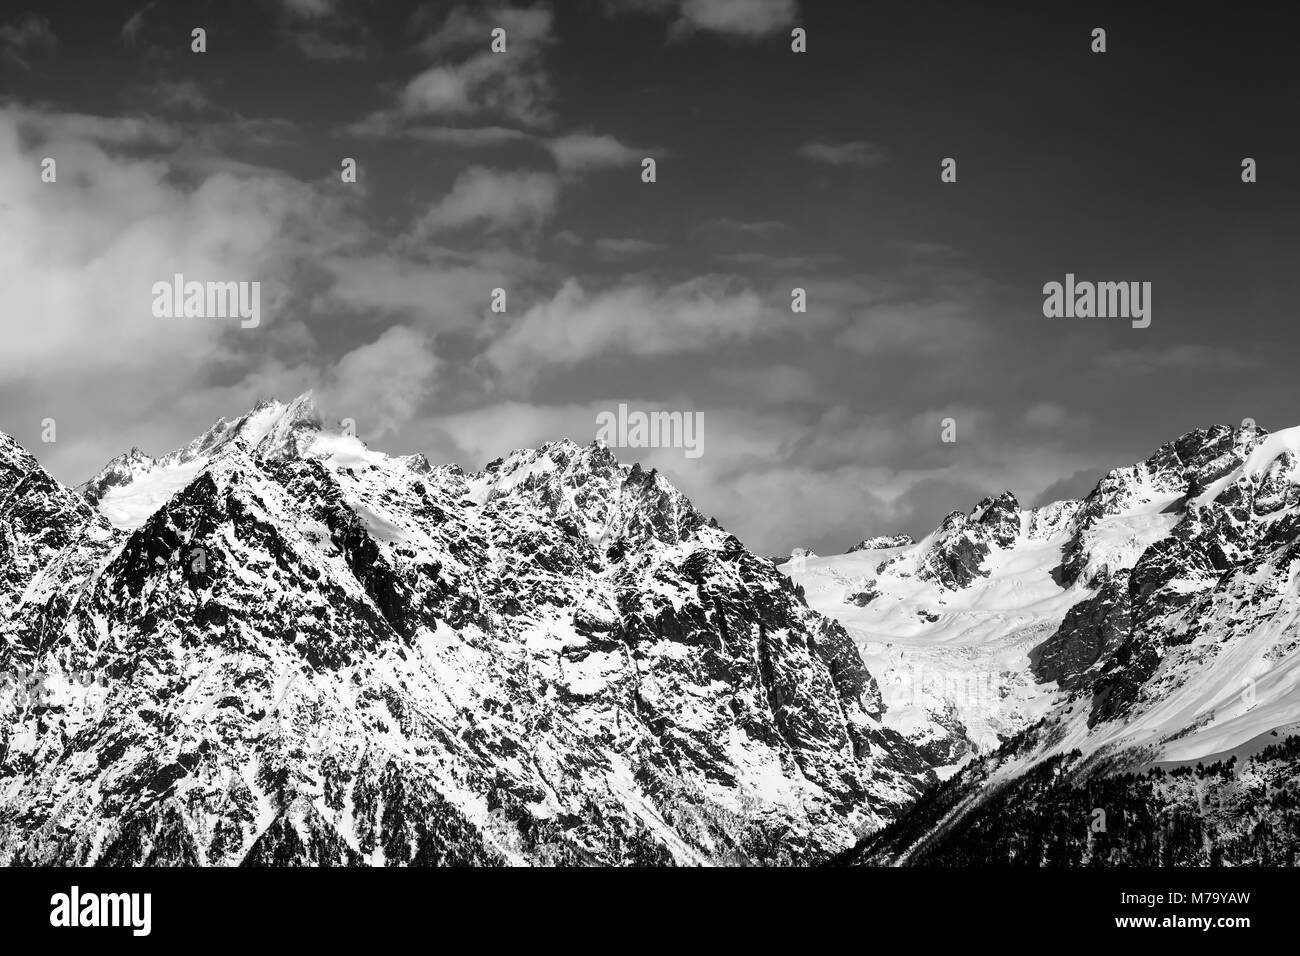 Snowy rocks at sunny day. View from chair lift on Hatsvali, Svaneti region of Georgia. Caucasus Mountains. Black and white toned landscape Stock Photo